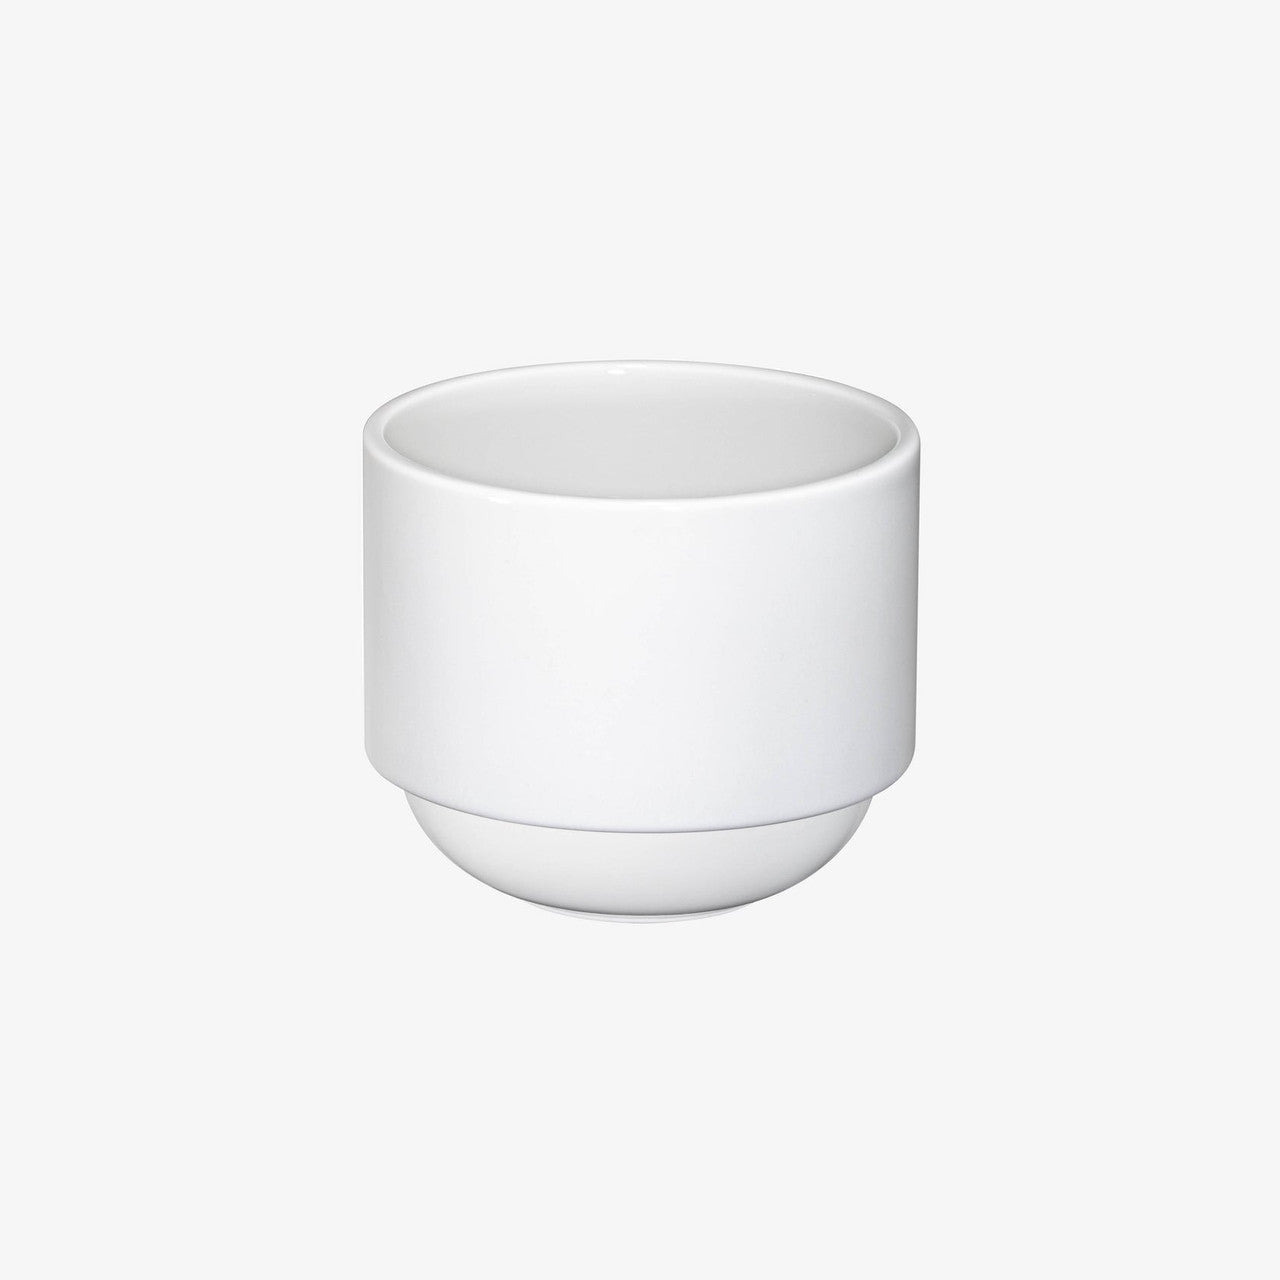 HASAMI PORCELAIN LATTE CUP IN WHITE 8.4 OZ